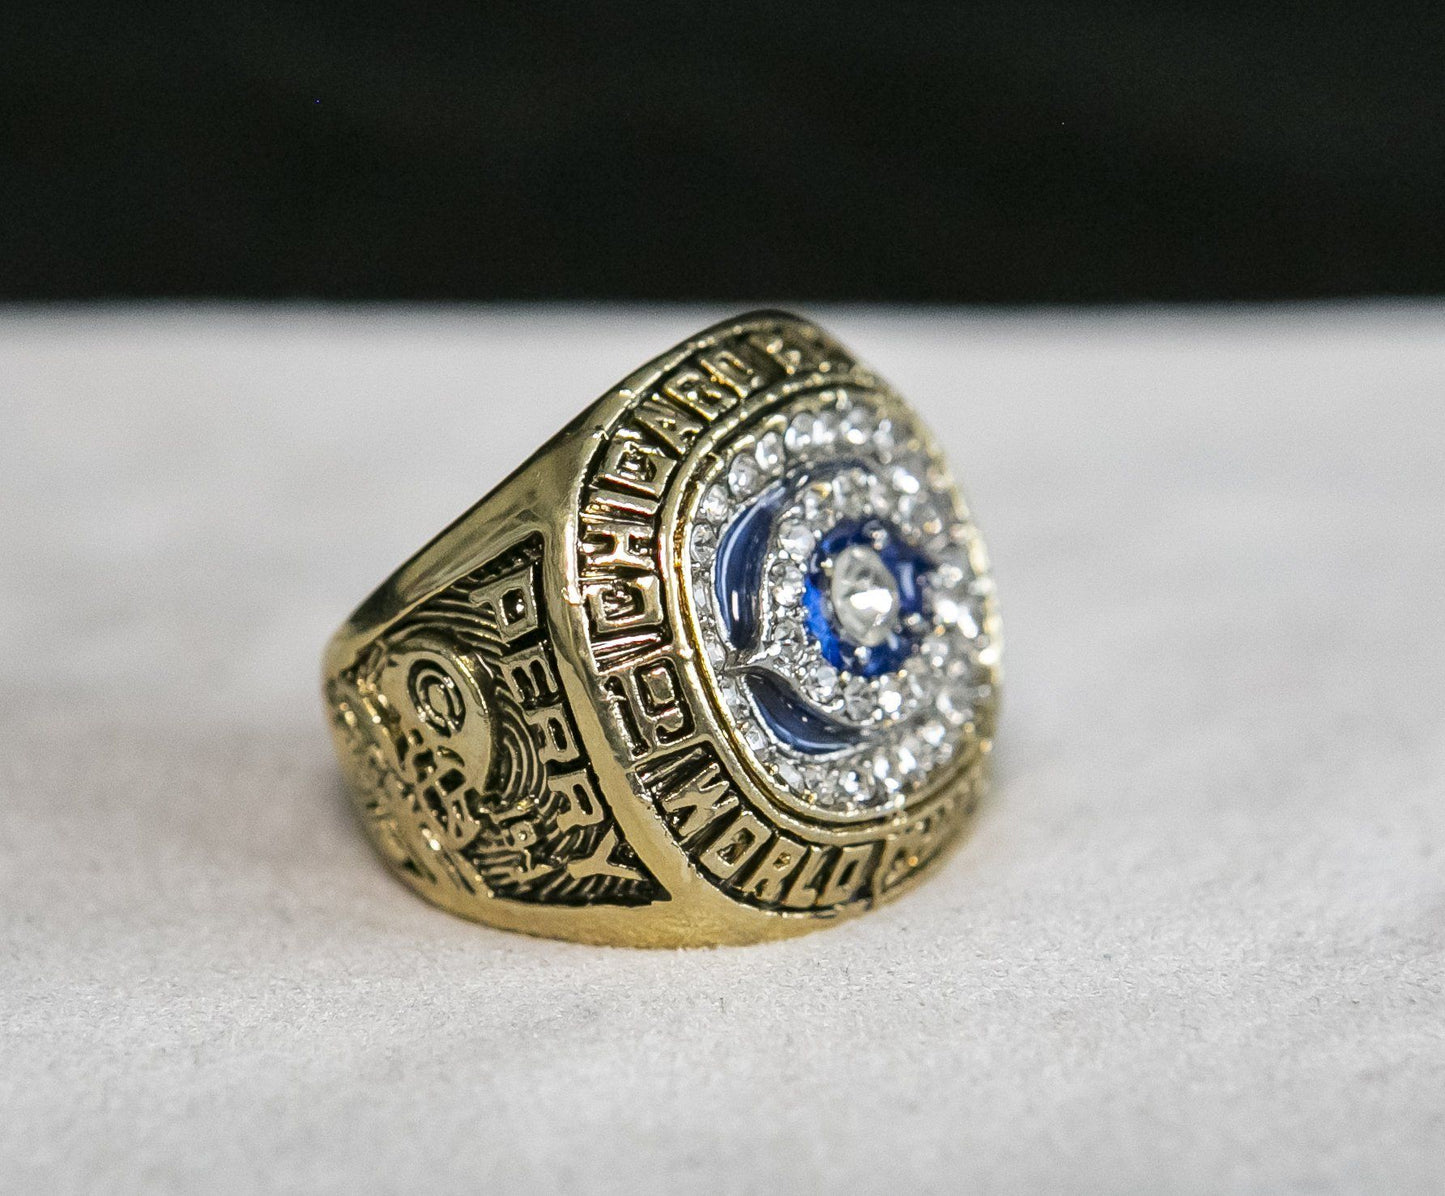 Chicago Bears Super Bowl Ring (1985) - Perry – Rings For Champs